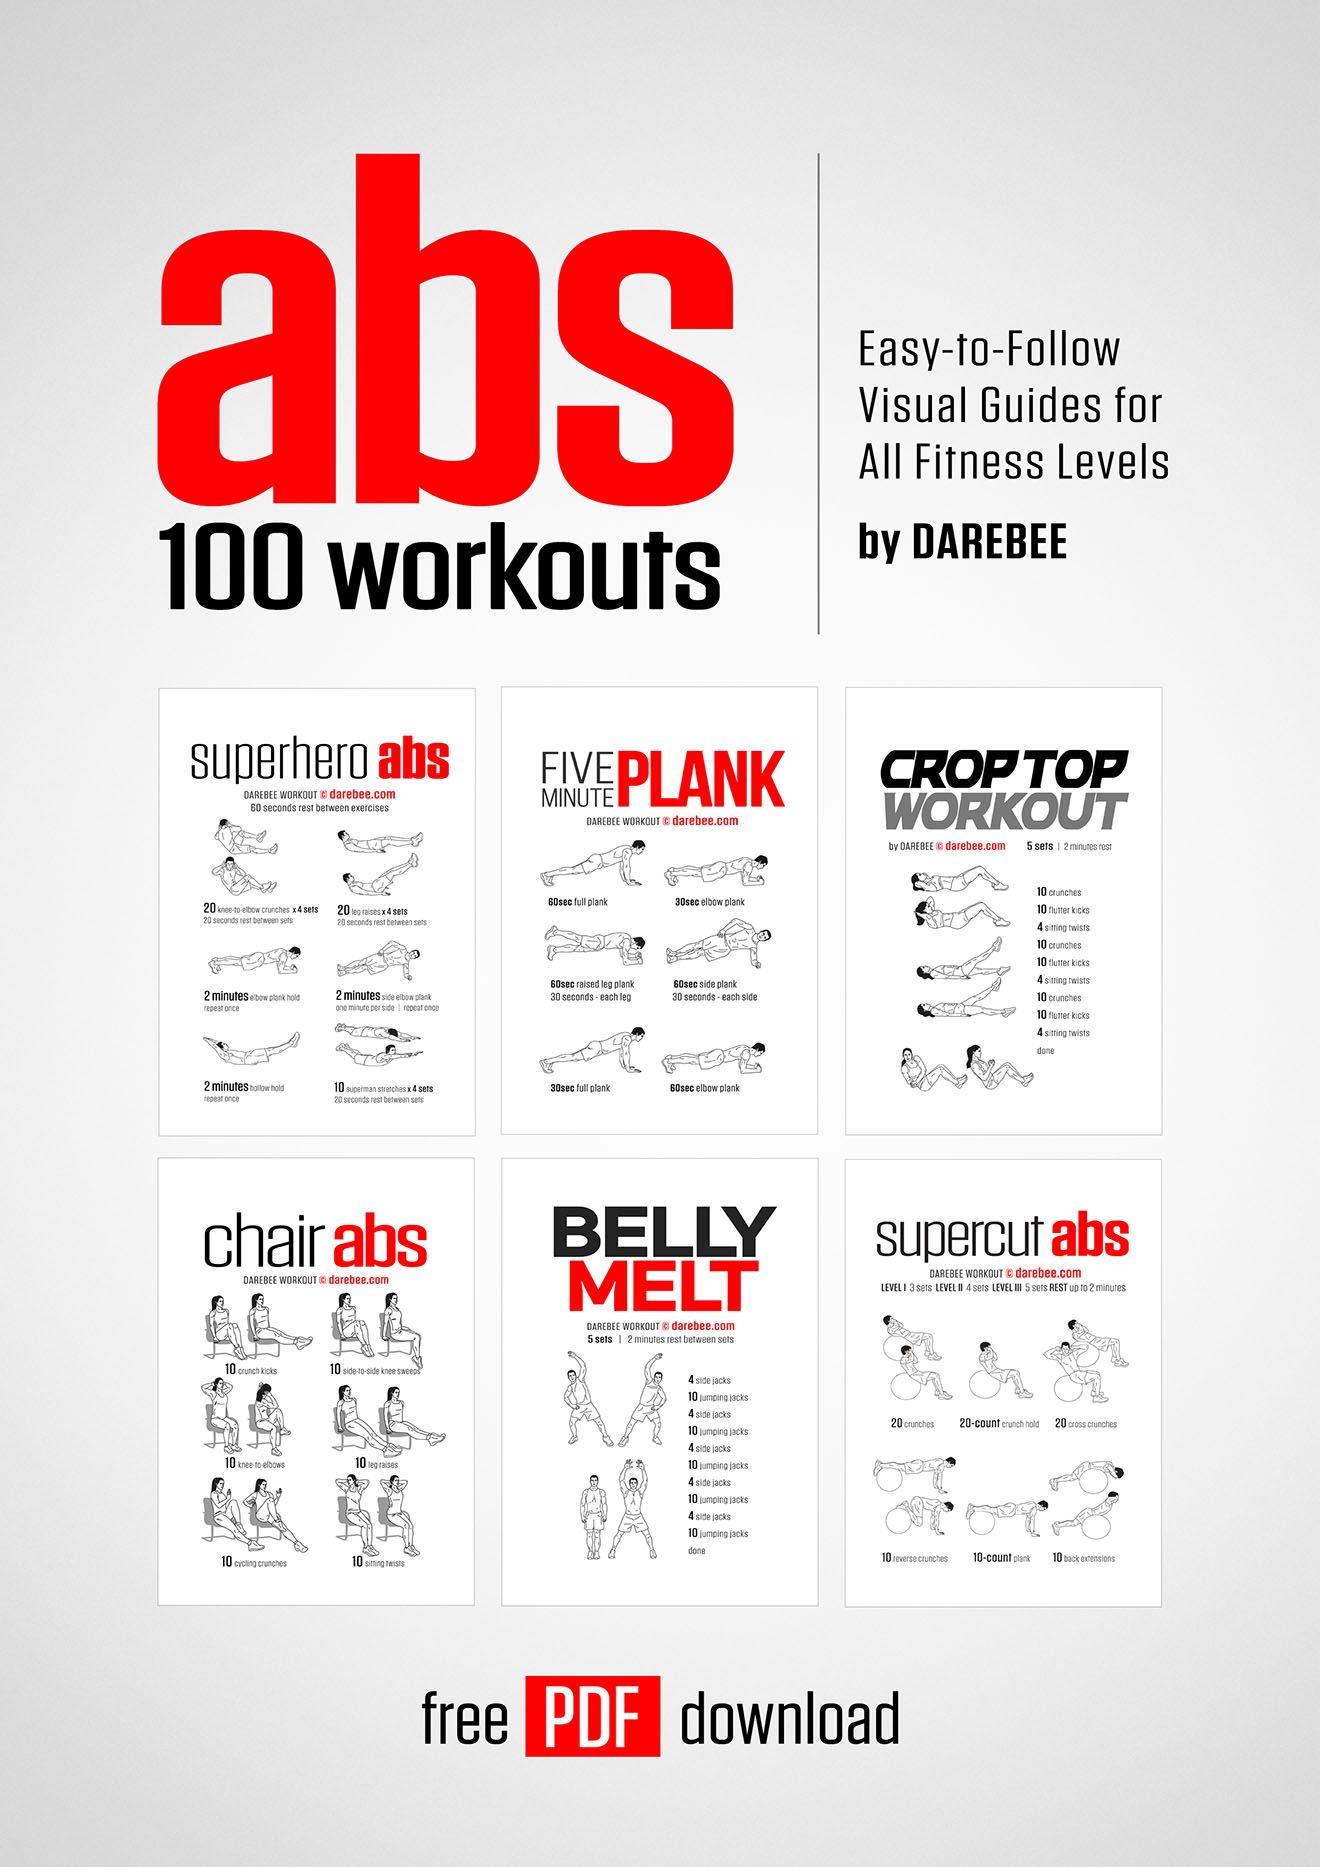 six pack abs workout at home pdf